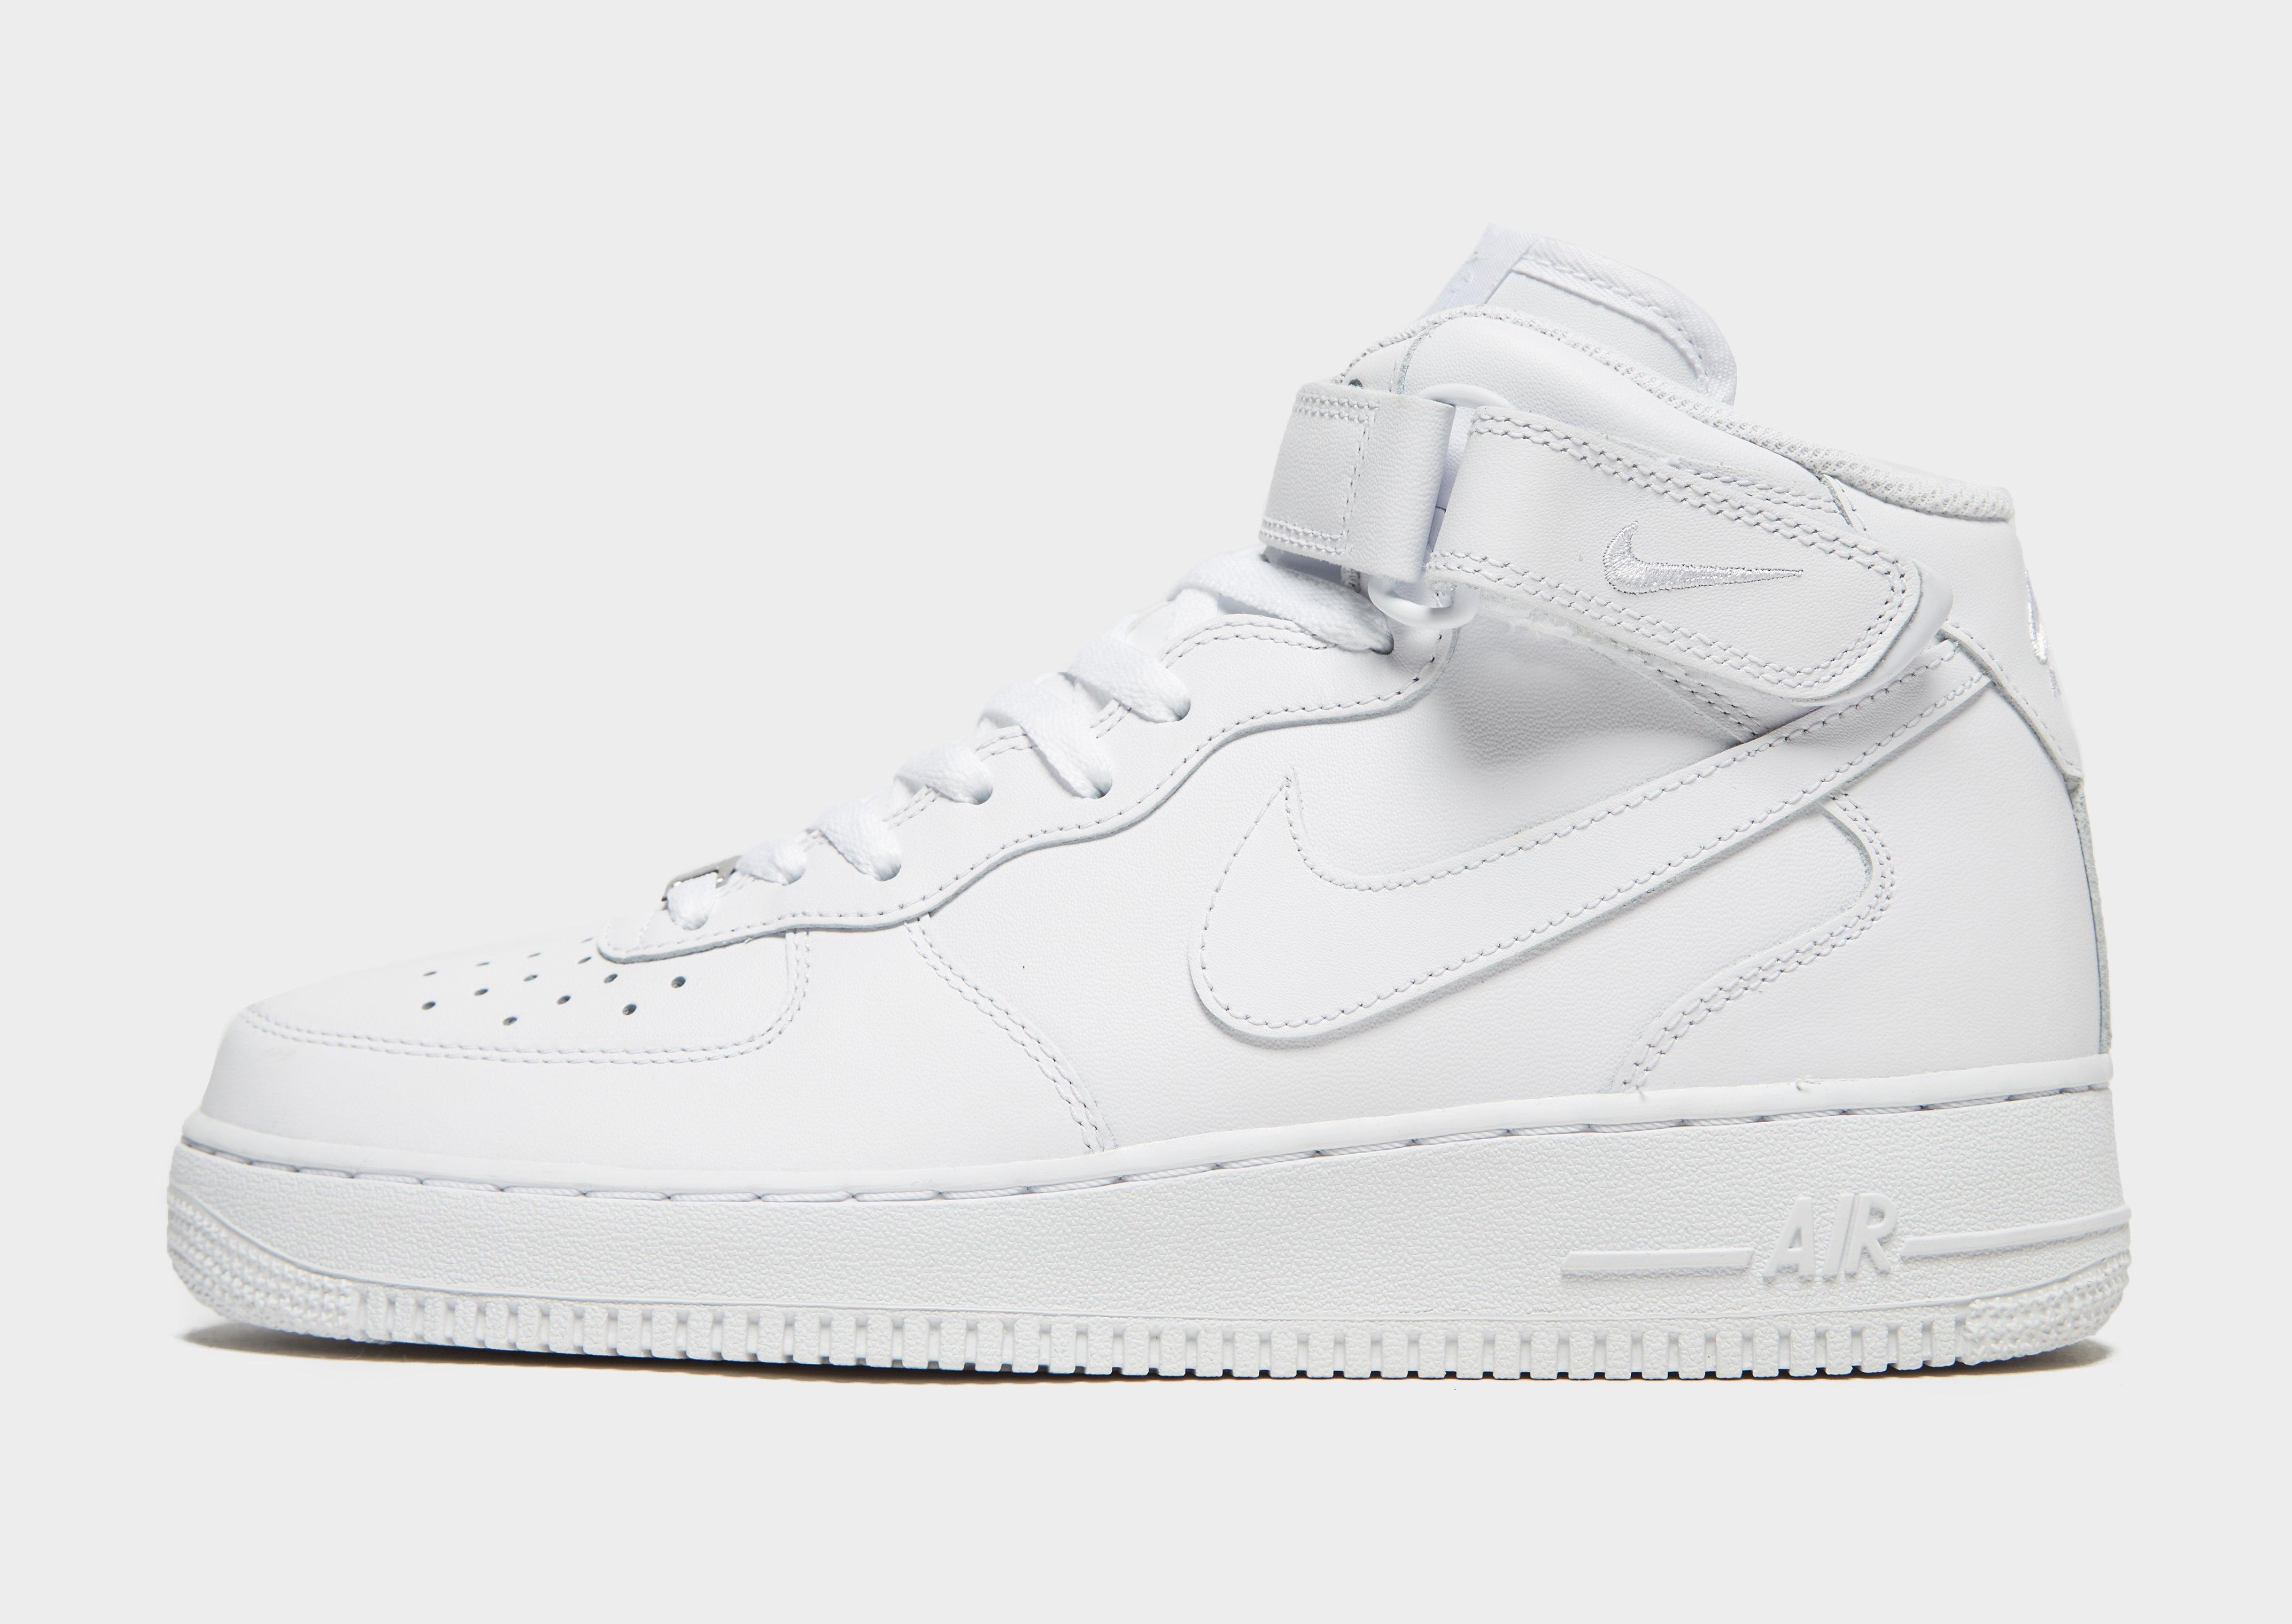 Acquista Nike Air Force 1 Mid in Bianco